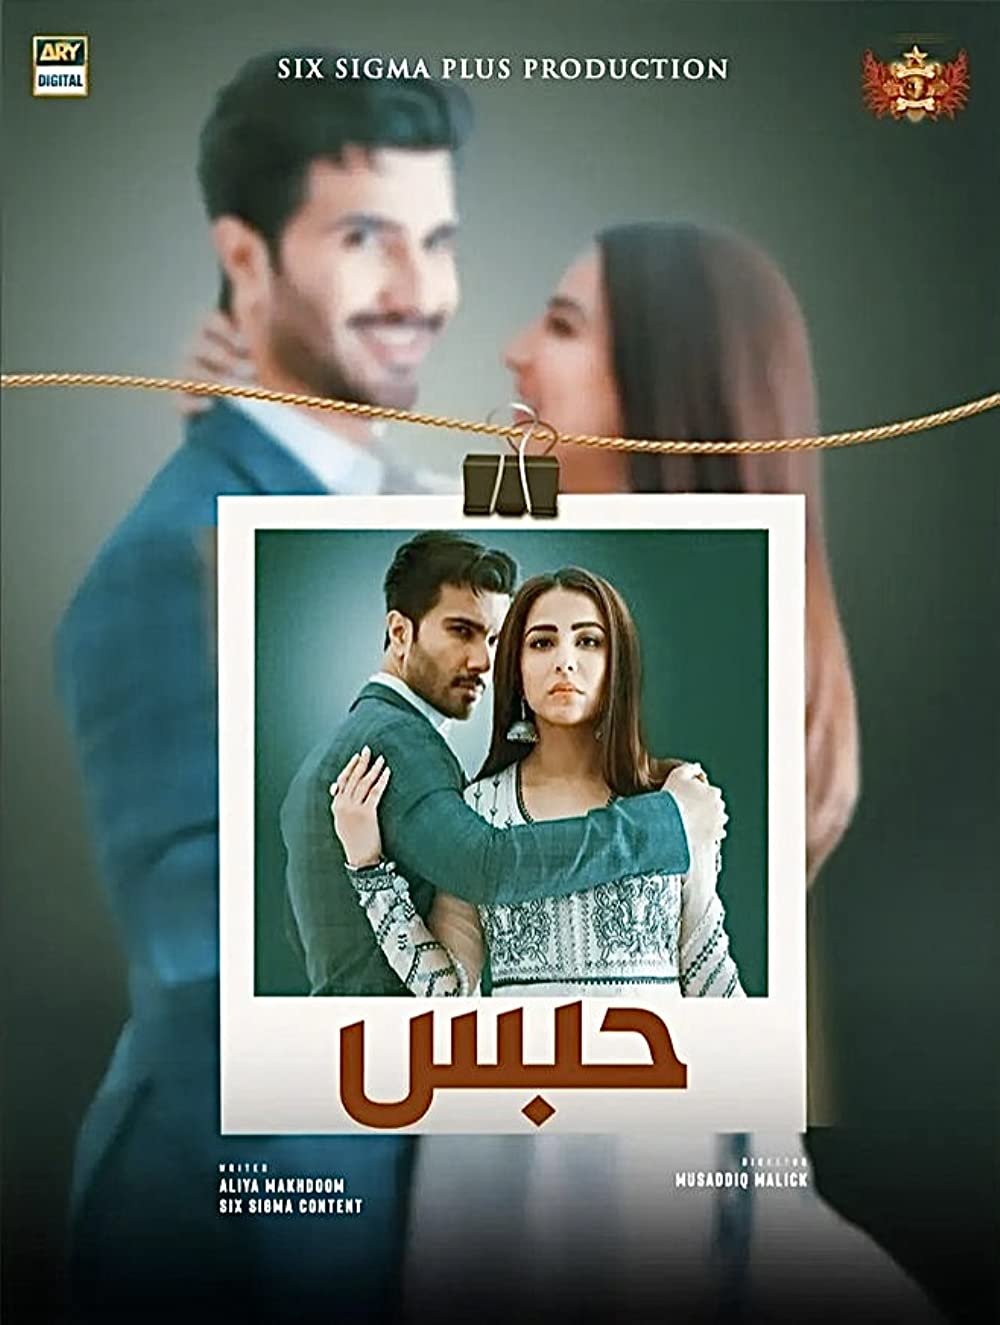 Habs Drama Cast Real Names and Pictures, Ary Digital